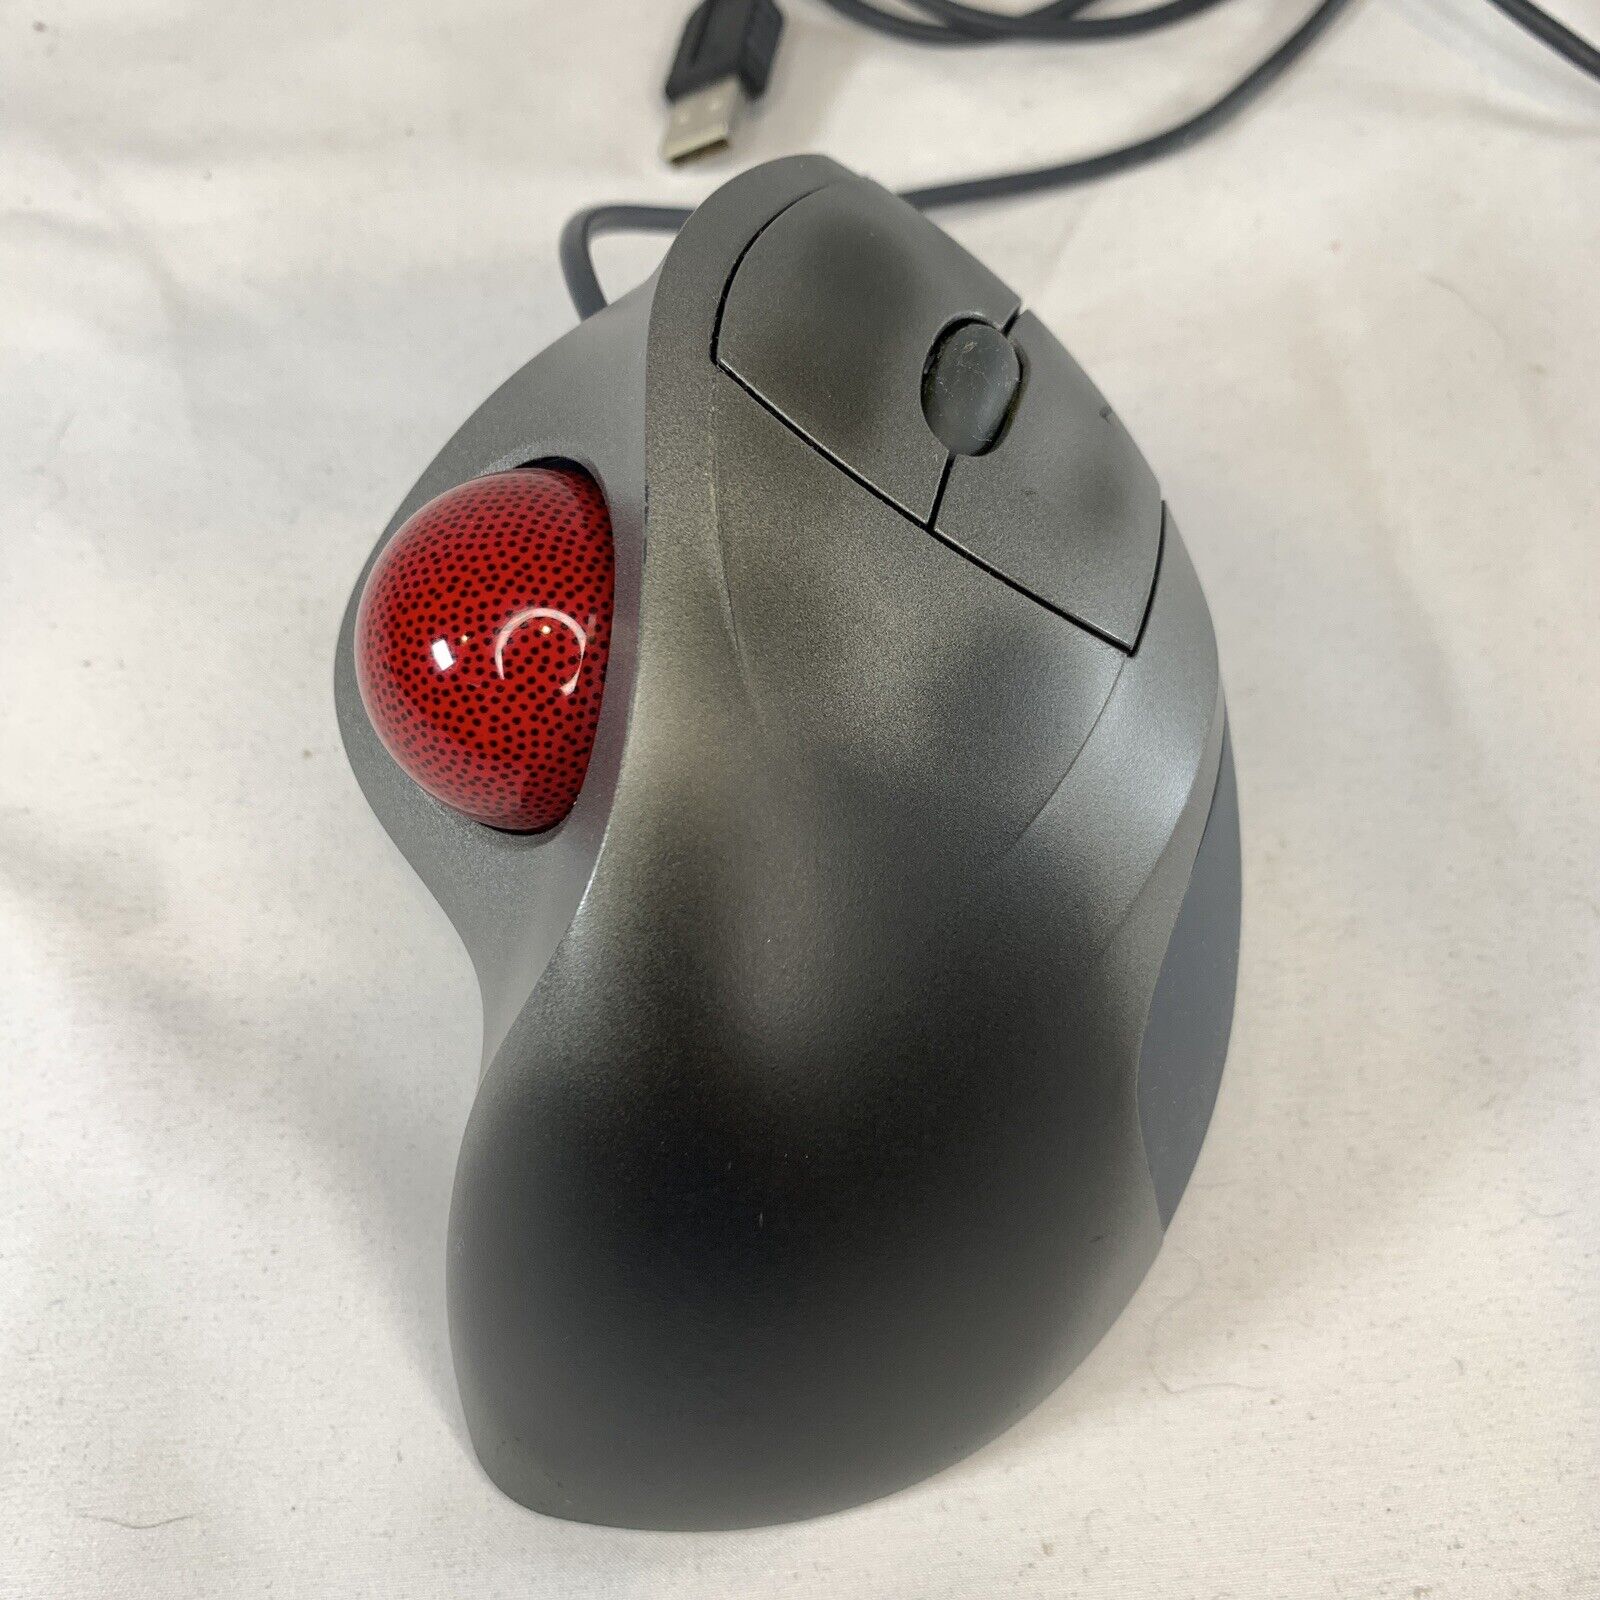 Logitech TrackMan RED BALL Wheel Mouse USB Trackball T-BB18 Tested Working